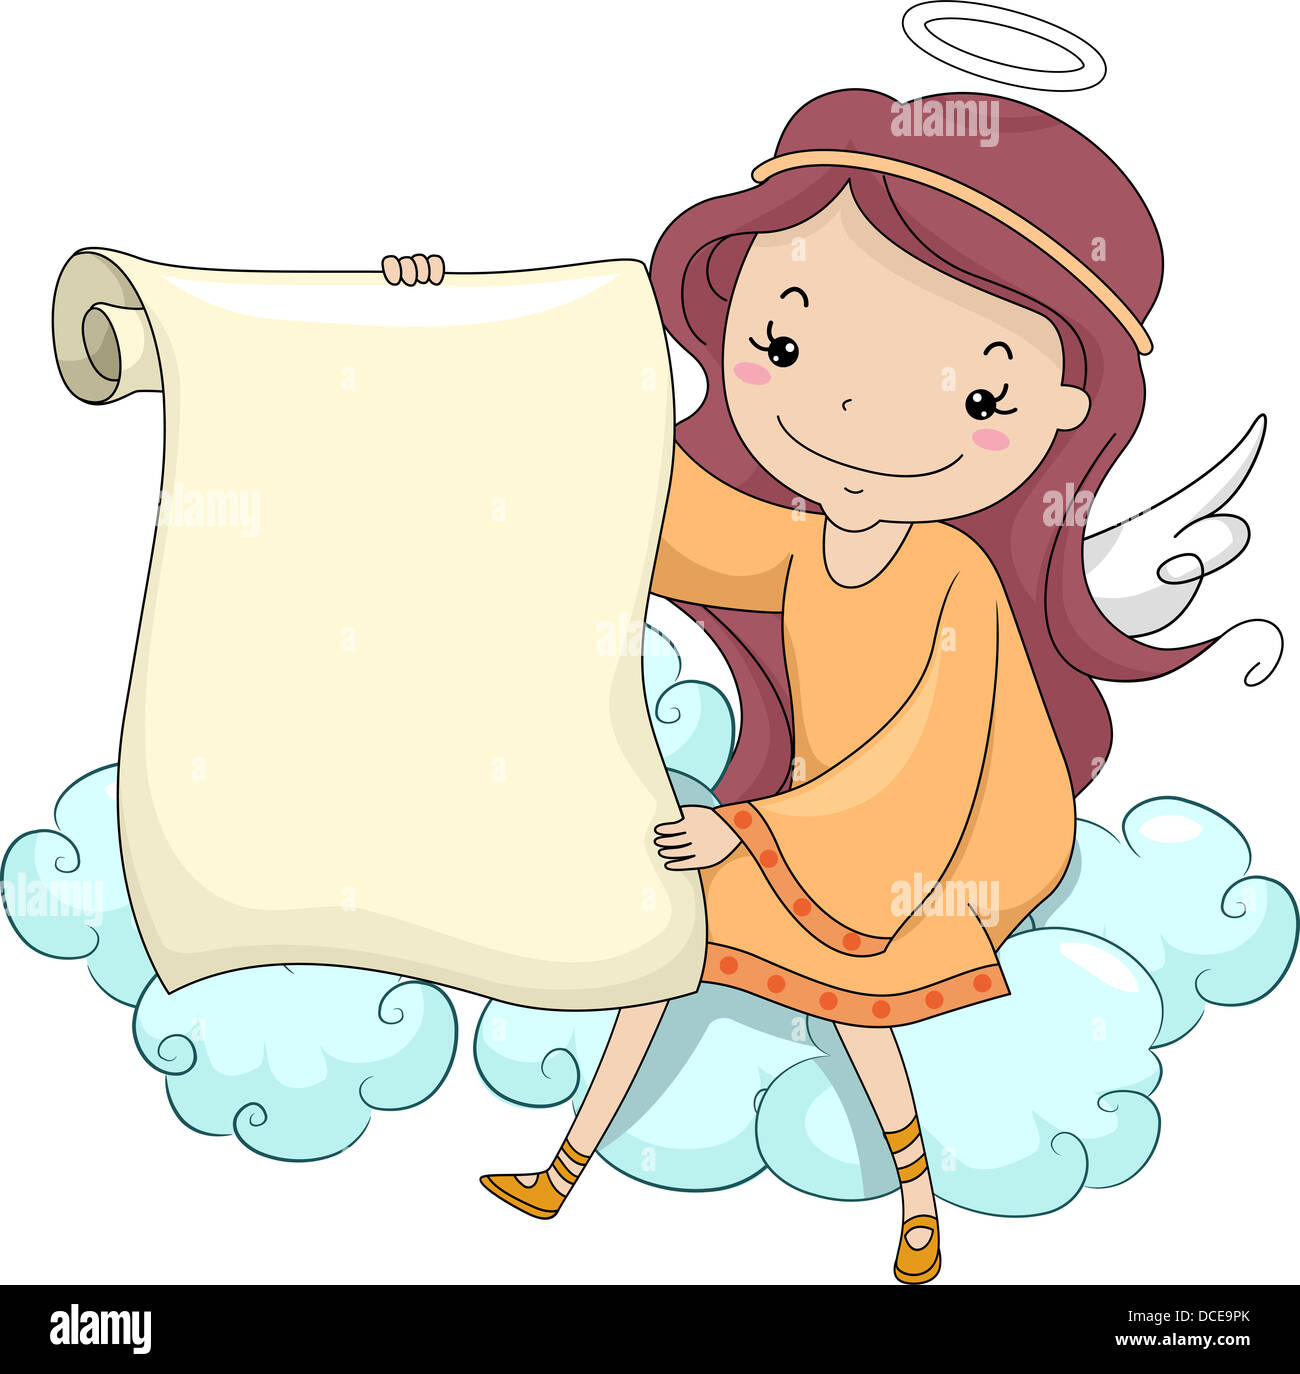 Illustration of a Girl Angel holding a Blank Scroll while Sitting on a Cloud Stock Photo